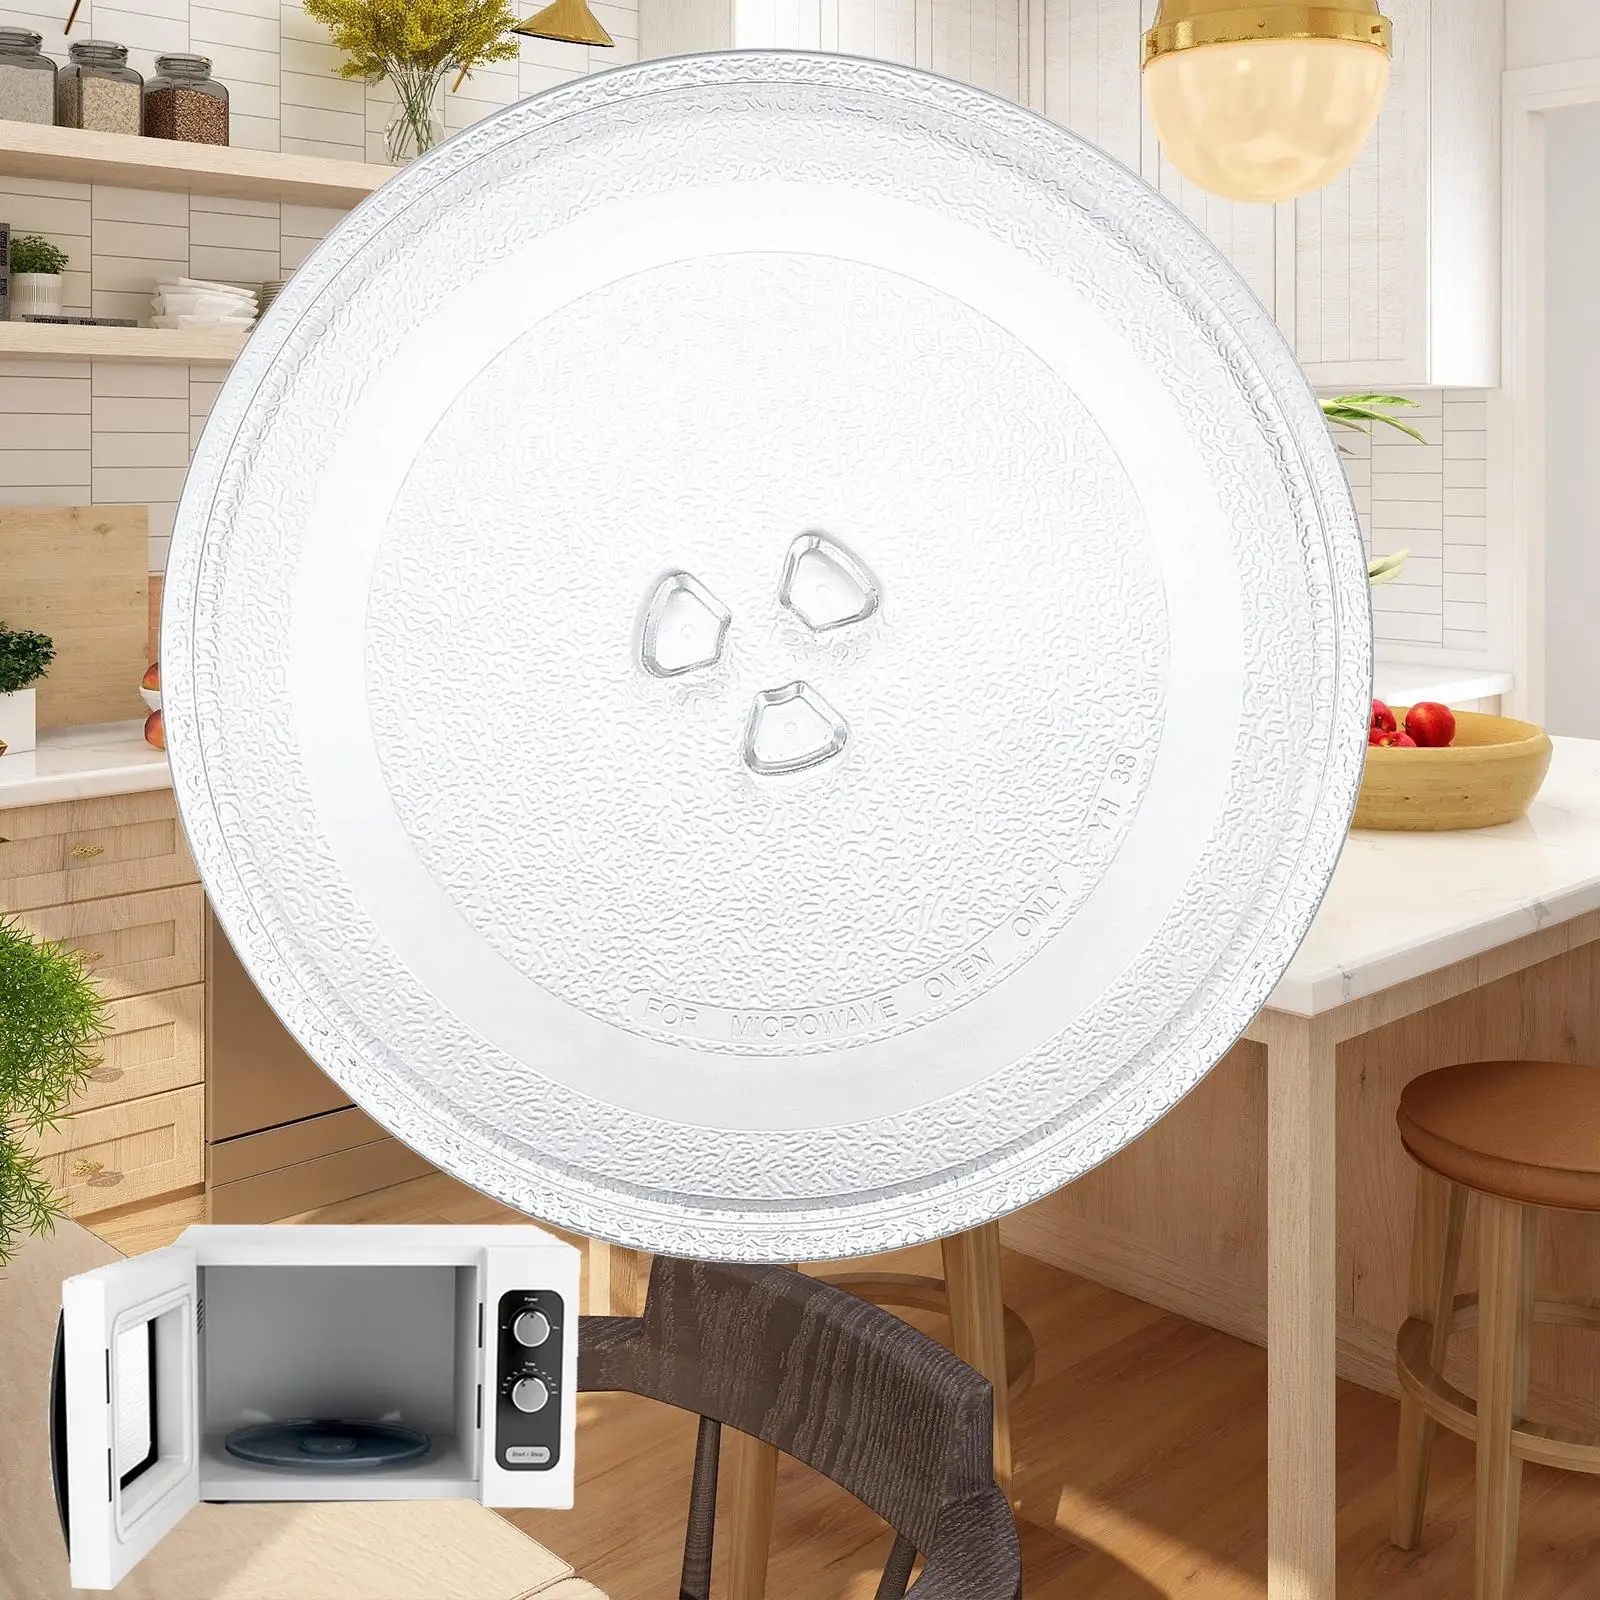 Microwave Plate Glass Turntable 24.5cm for Microwave Ovens Easily Install Accessories